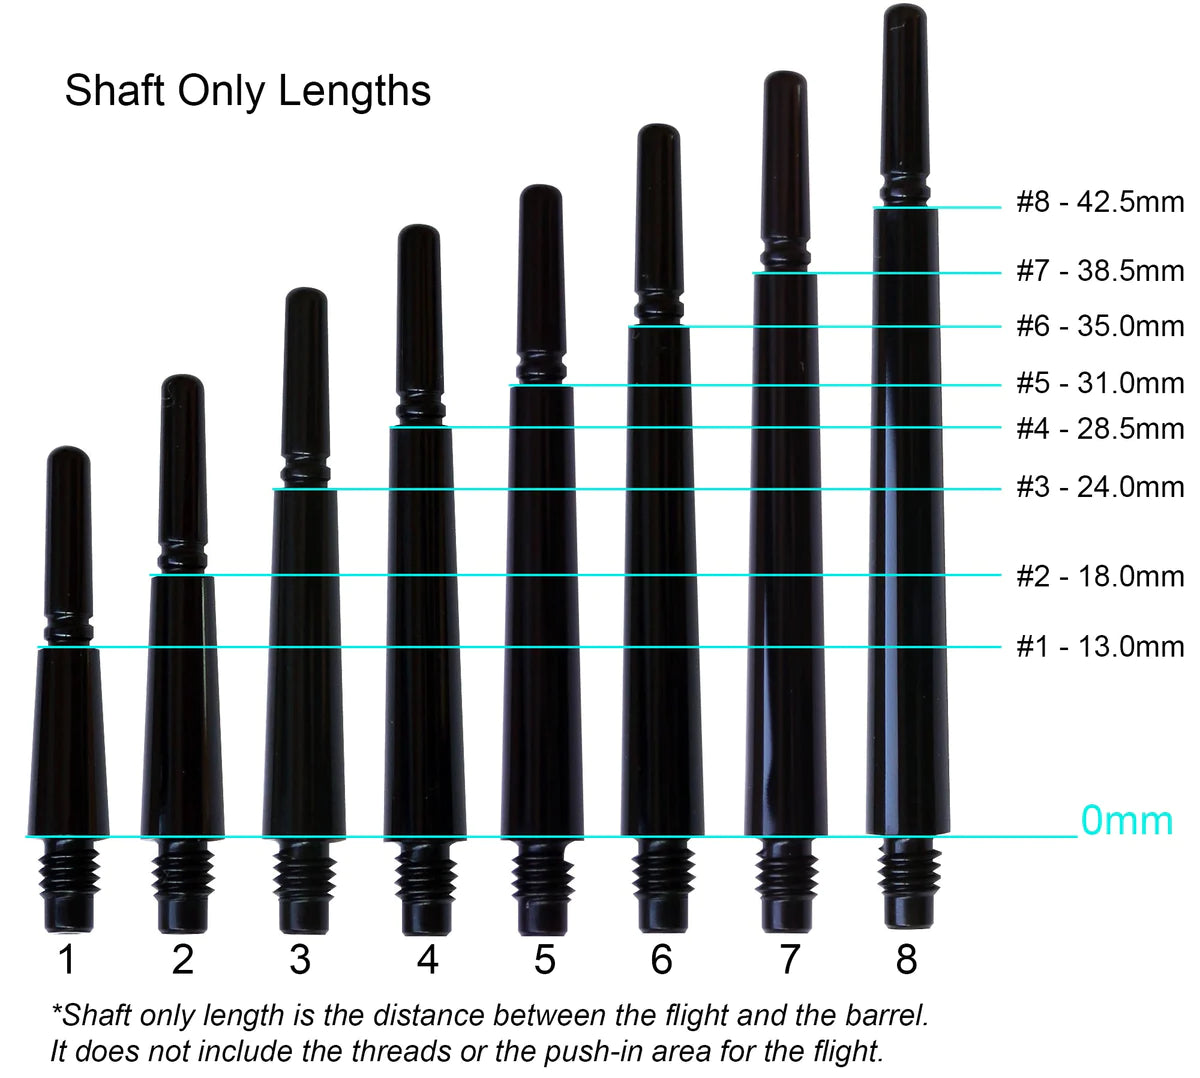 Guide to Fit Flight Dart Shaft Lengths, displaying shafts #1 through #8 with measurements ranging from 13.0mm to 42.5mm for customized dart setups.